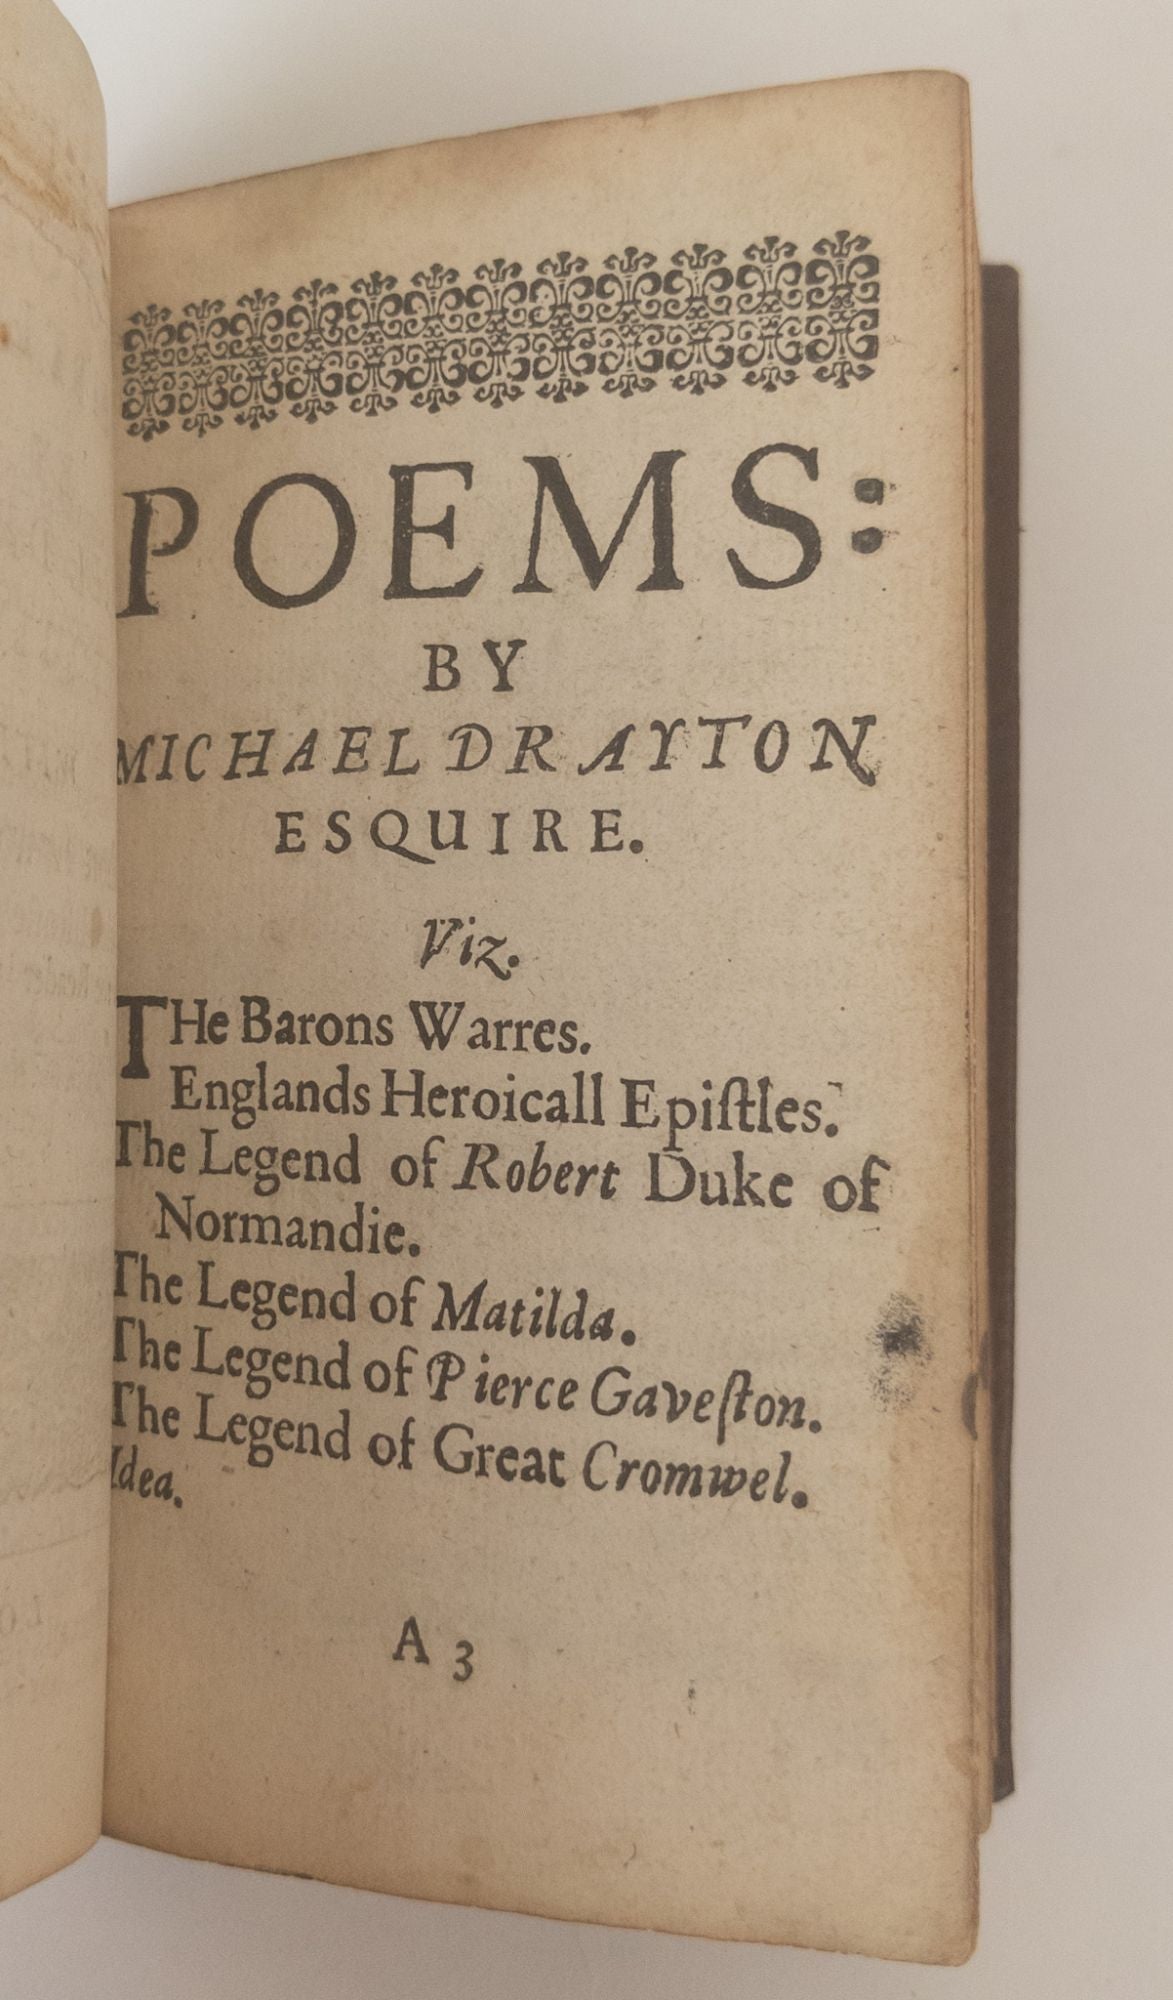 Product Image for POEMS: ENGLANDS HEROICALL EPISTLES; [Bound with] THE LEGENDS OF ROBERT, DUKE OF NORMANDIE. MATILDA, THE FAIRE. PIERCE GAVESTON, EARL OF CORNWALL. THOMAS CROMWEL, EARLE OF ESSEX